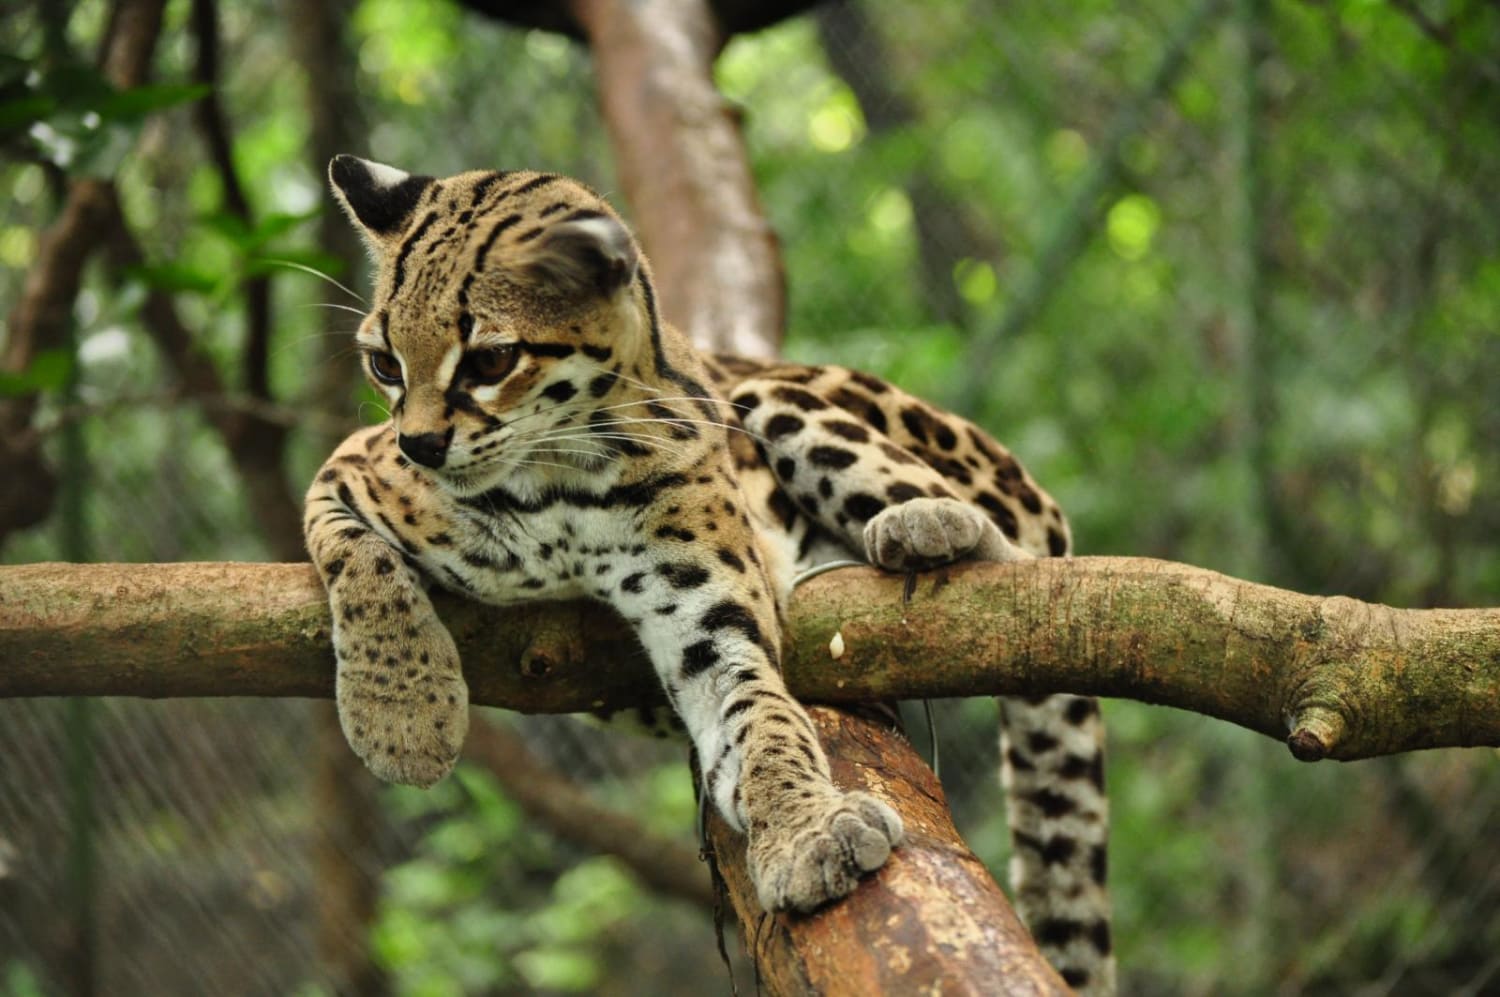 The Margay, while quite adorable is a vicious and intelligent predator. One of its many hunting techniques involves mimicking the call of a baby tamarin to lure in adults who are then caught by the Margay and devoured.